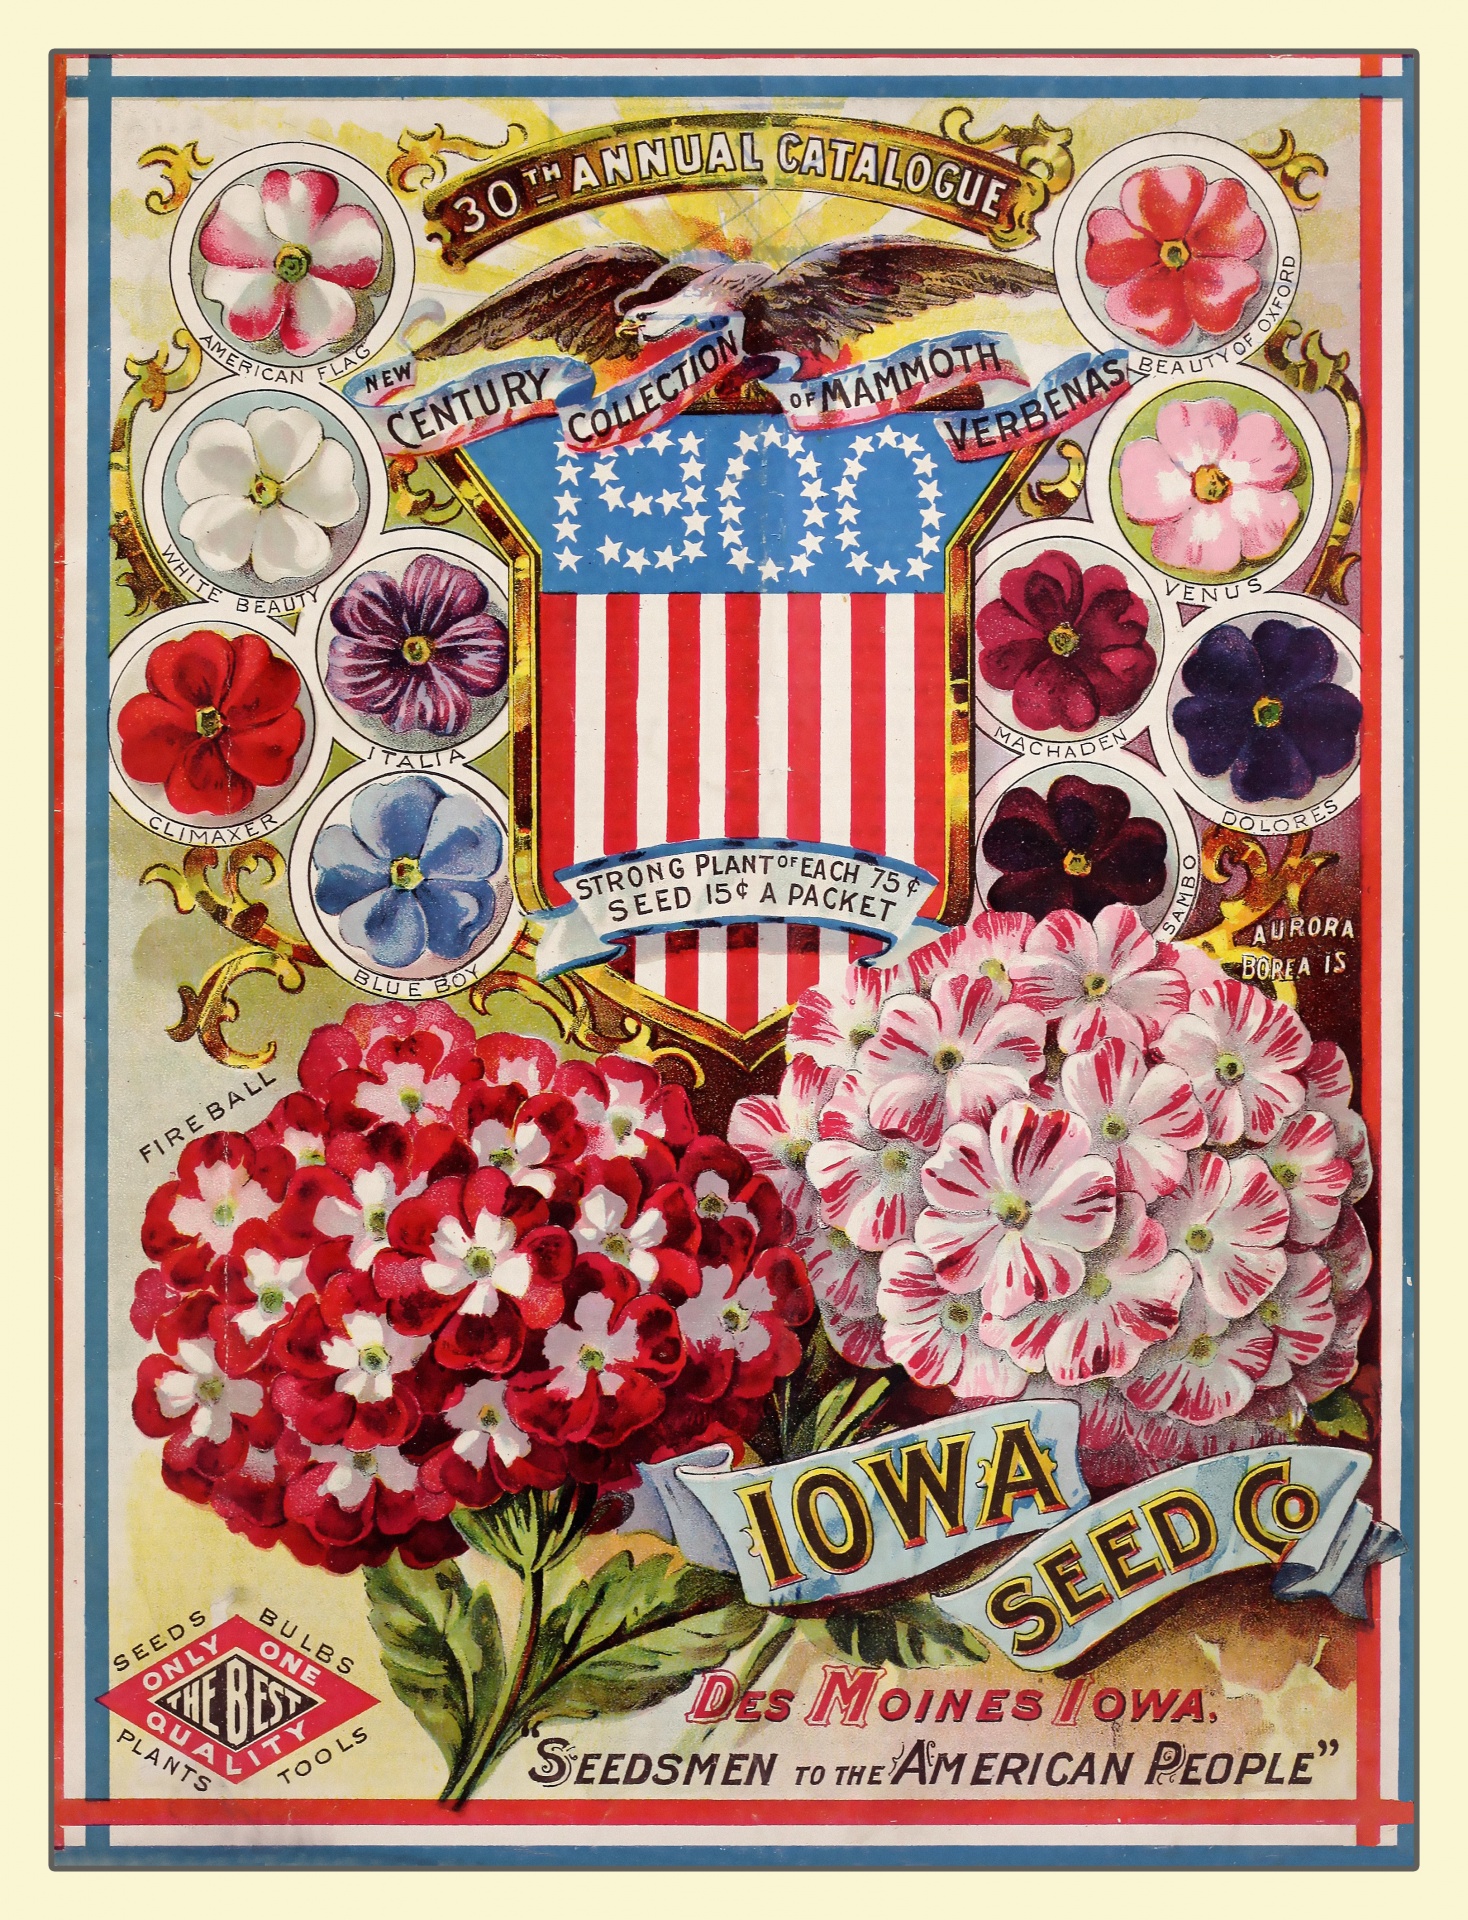 Antique seed catalogue for 1900s with colorful art painting of flowers in red, white and blue with american flag